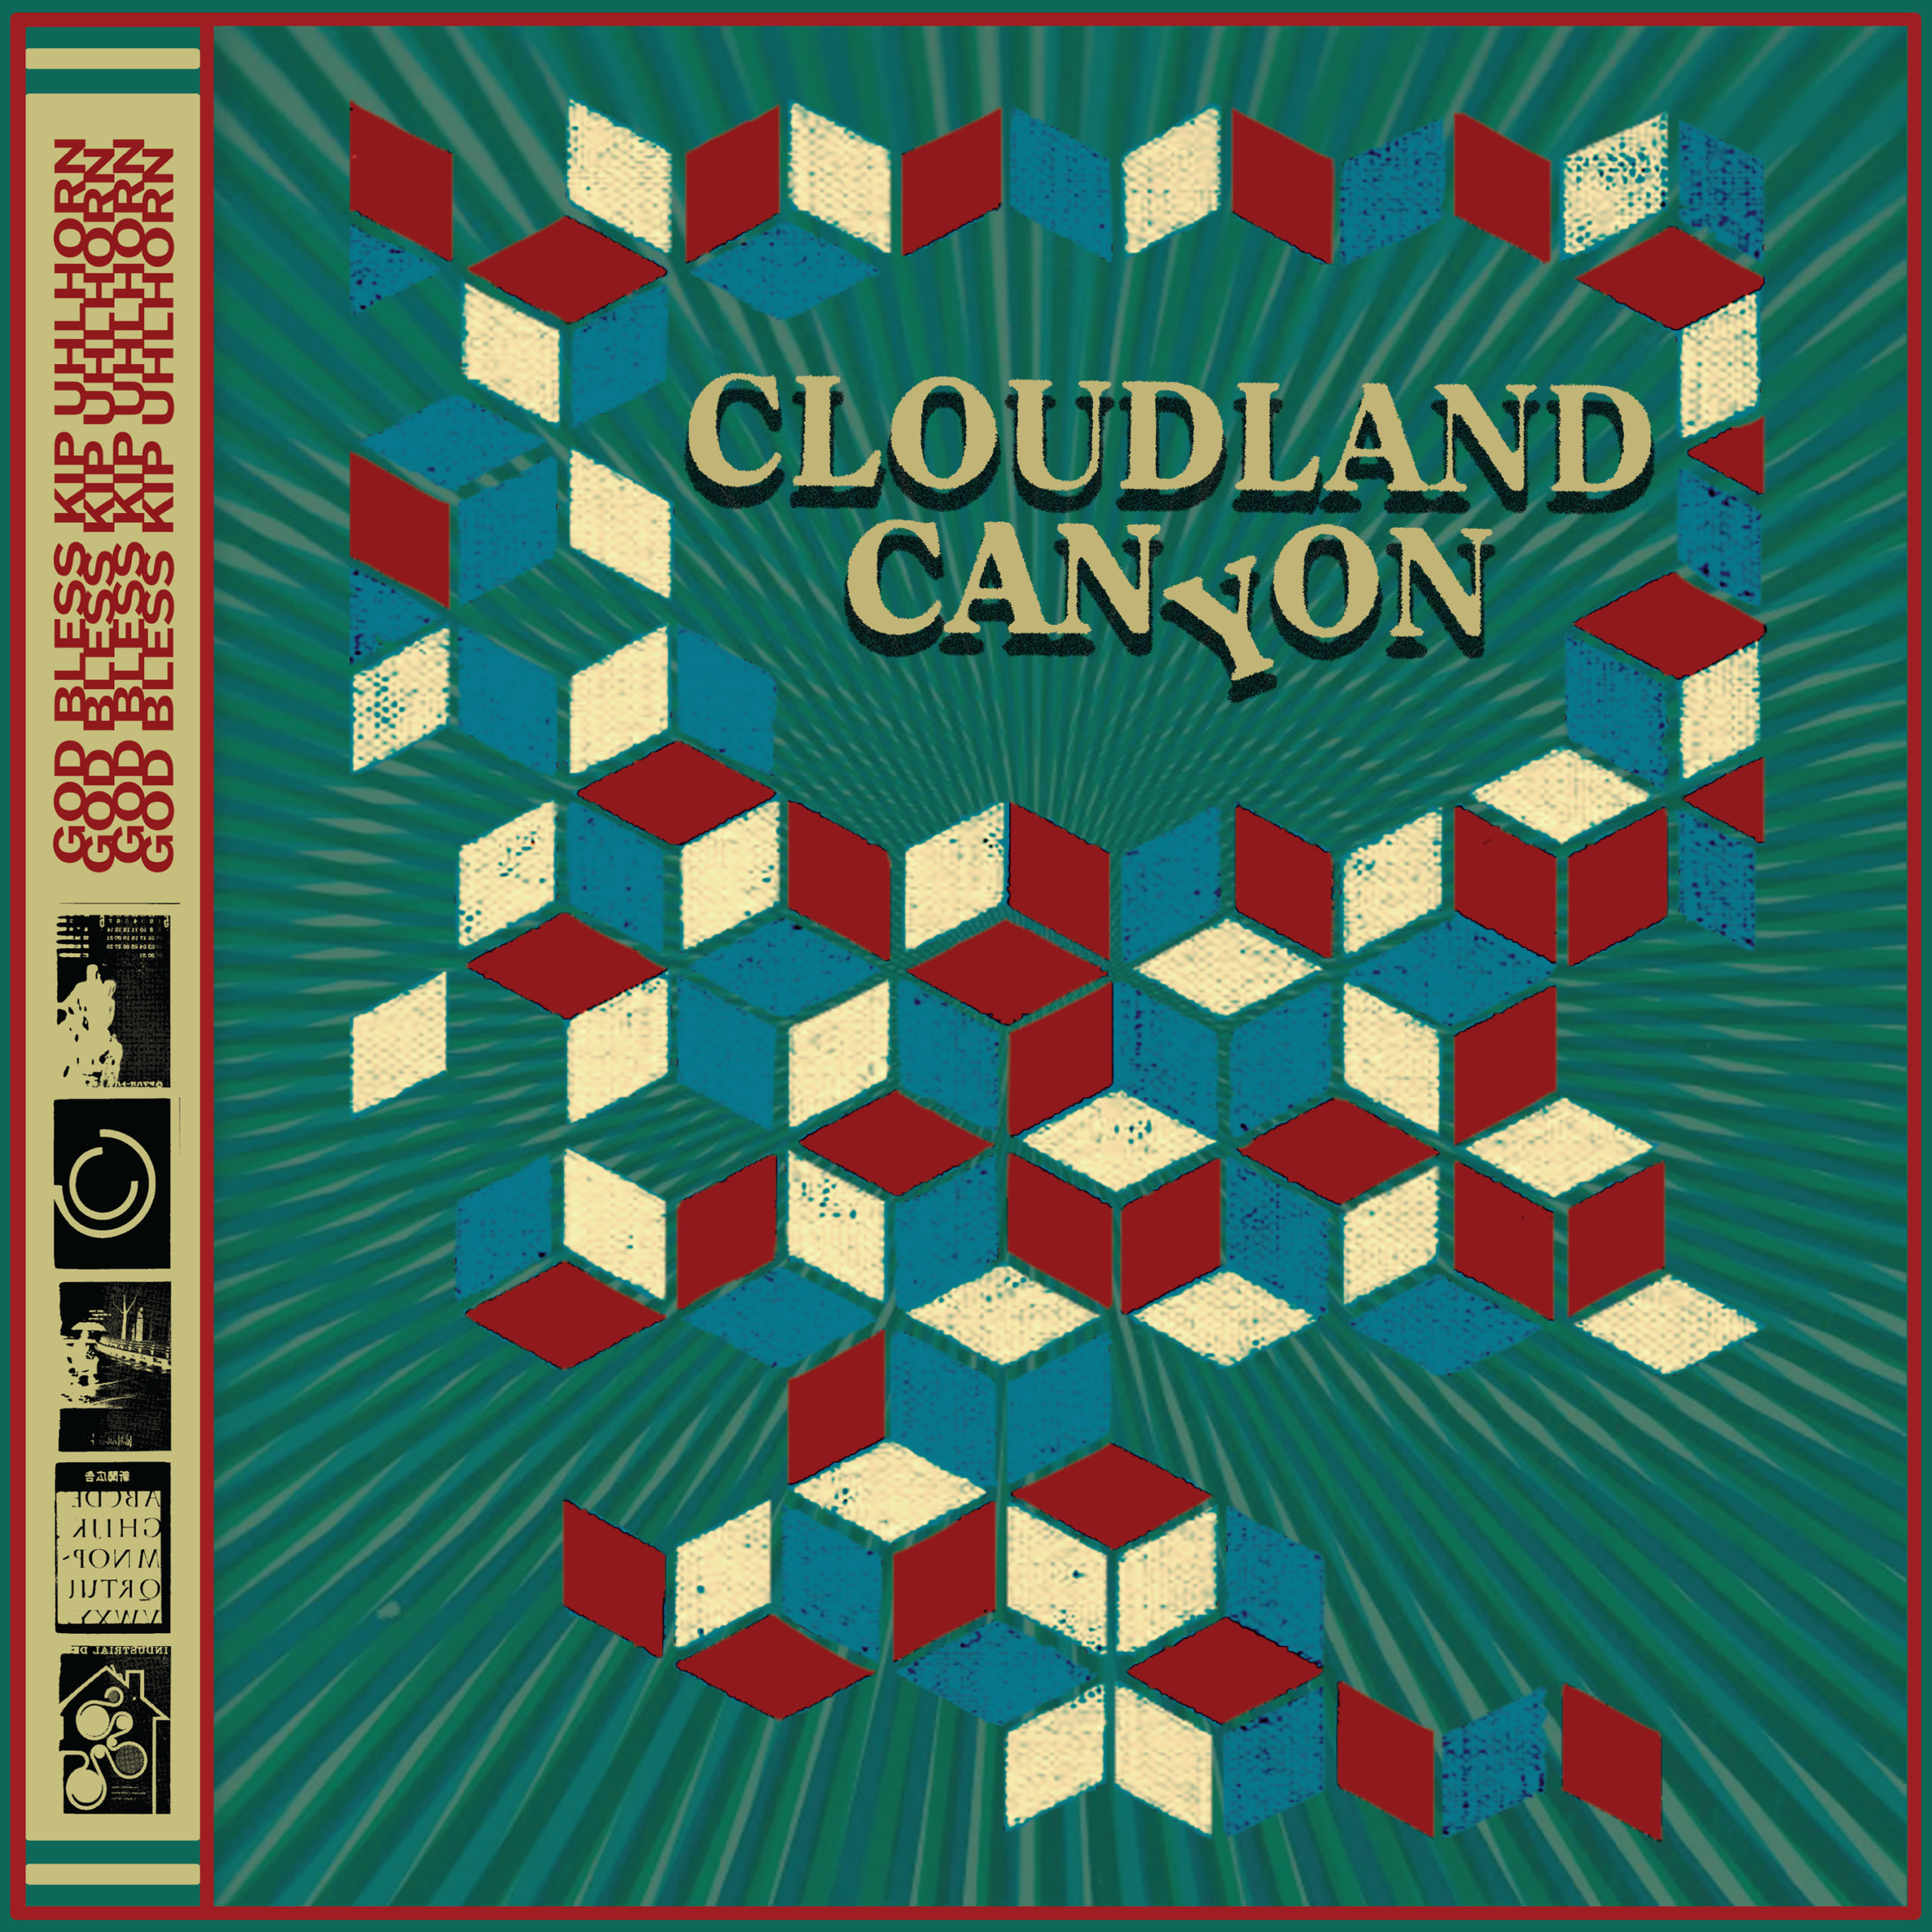 Stream the new self-titled LP from Cloudland Canyon